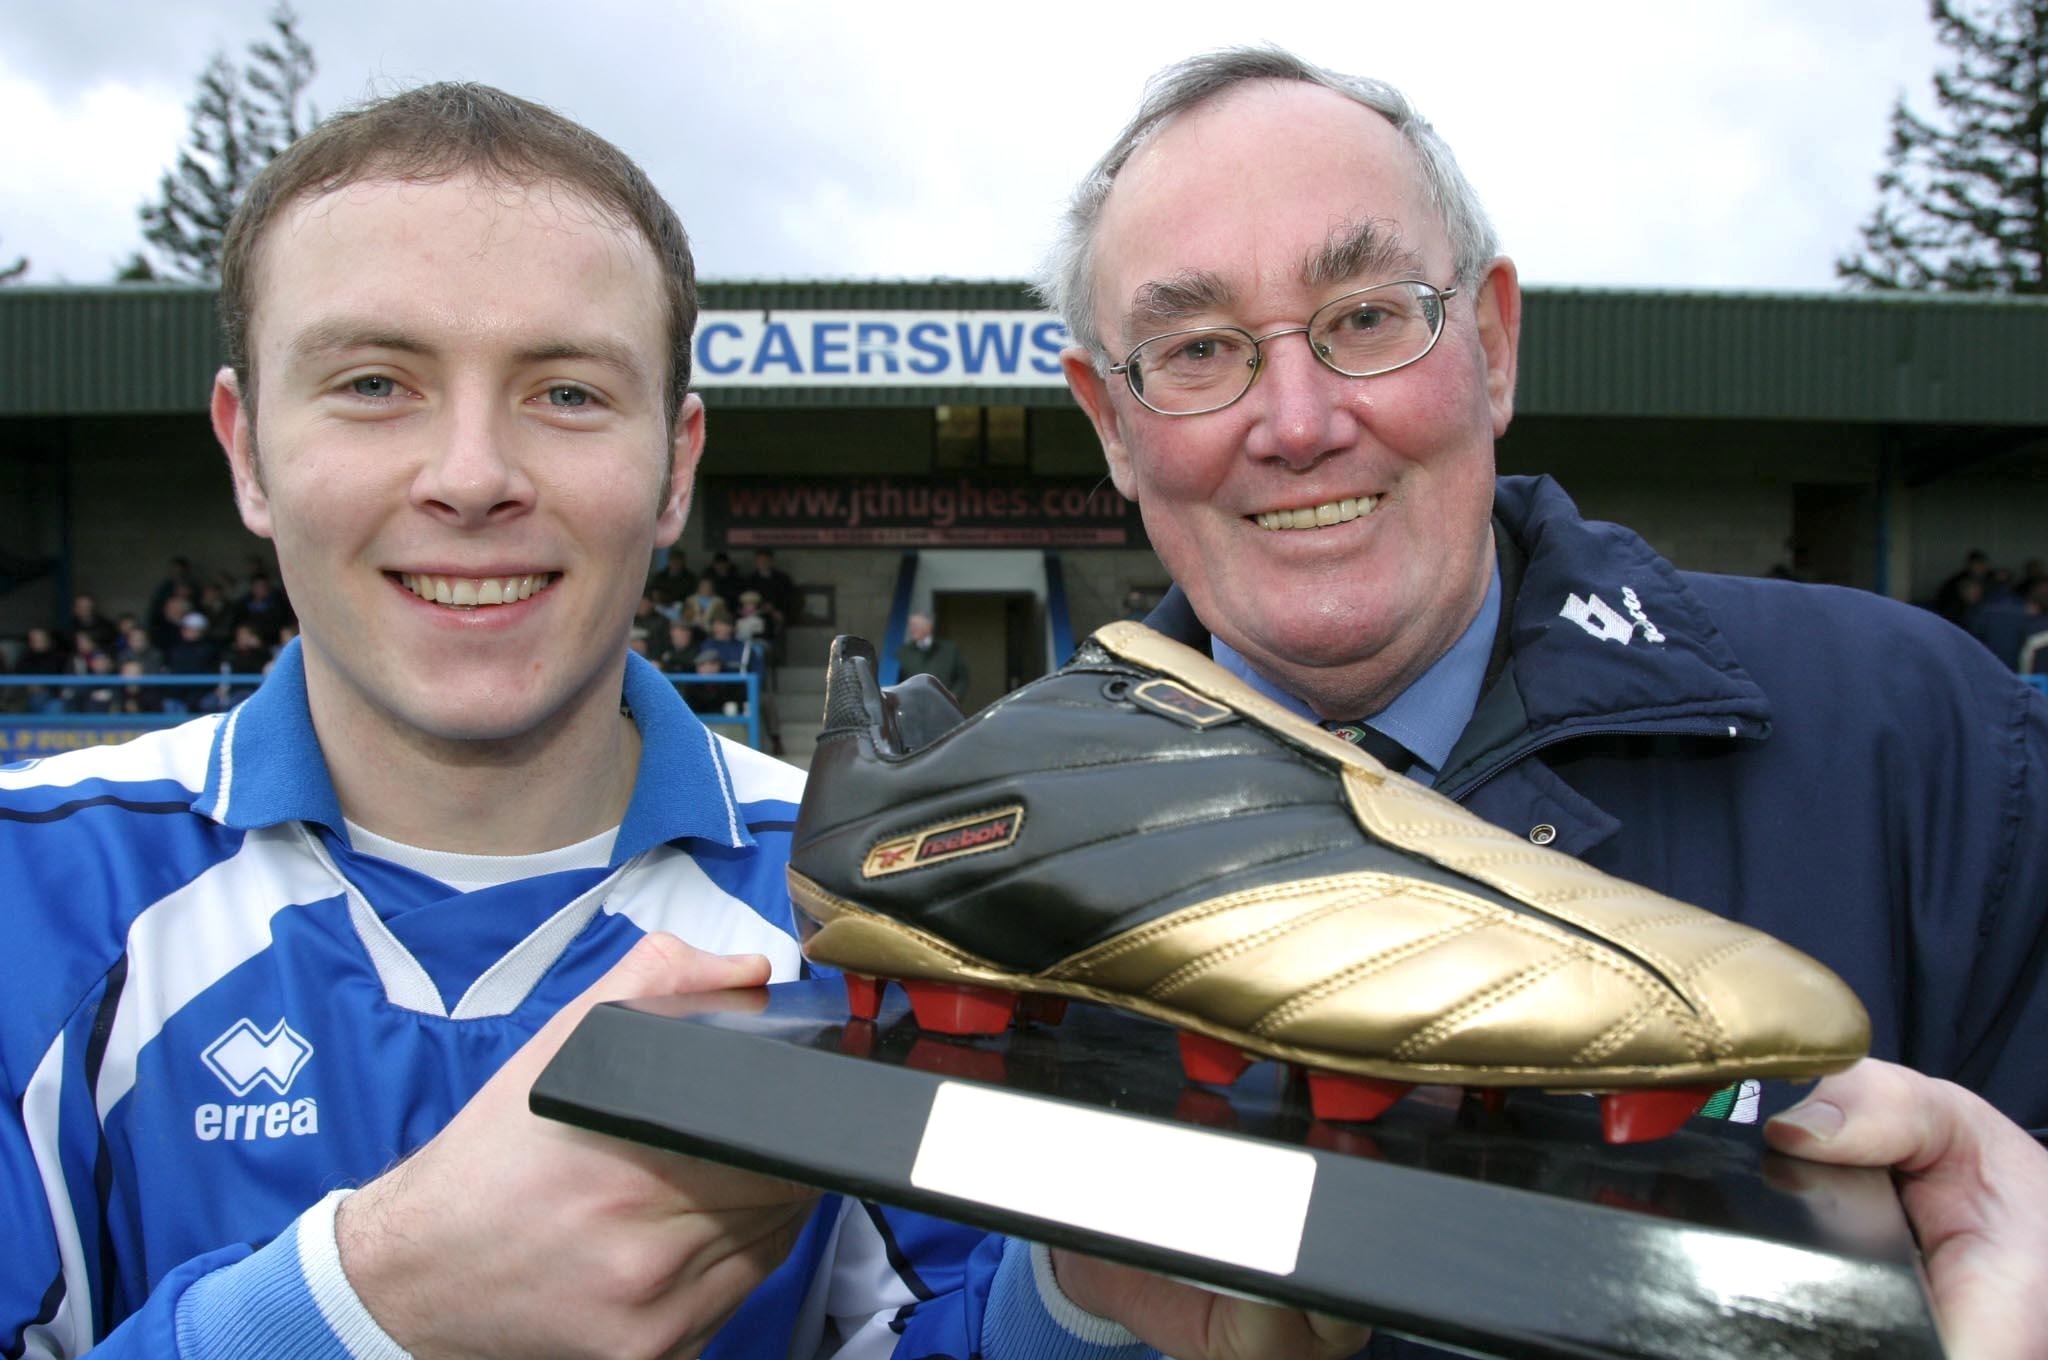 Throwback: Graham Evans from Caersws Football Club awarded the League of Wales Golden Boot for most goals last season 2003-04.